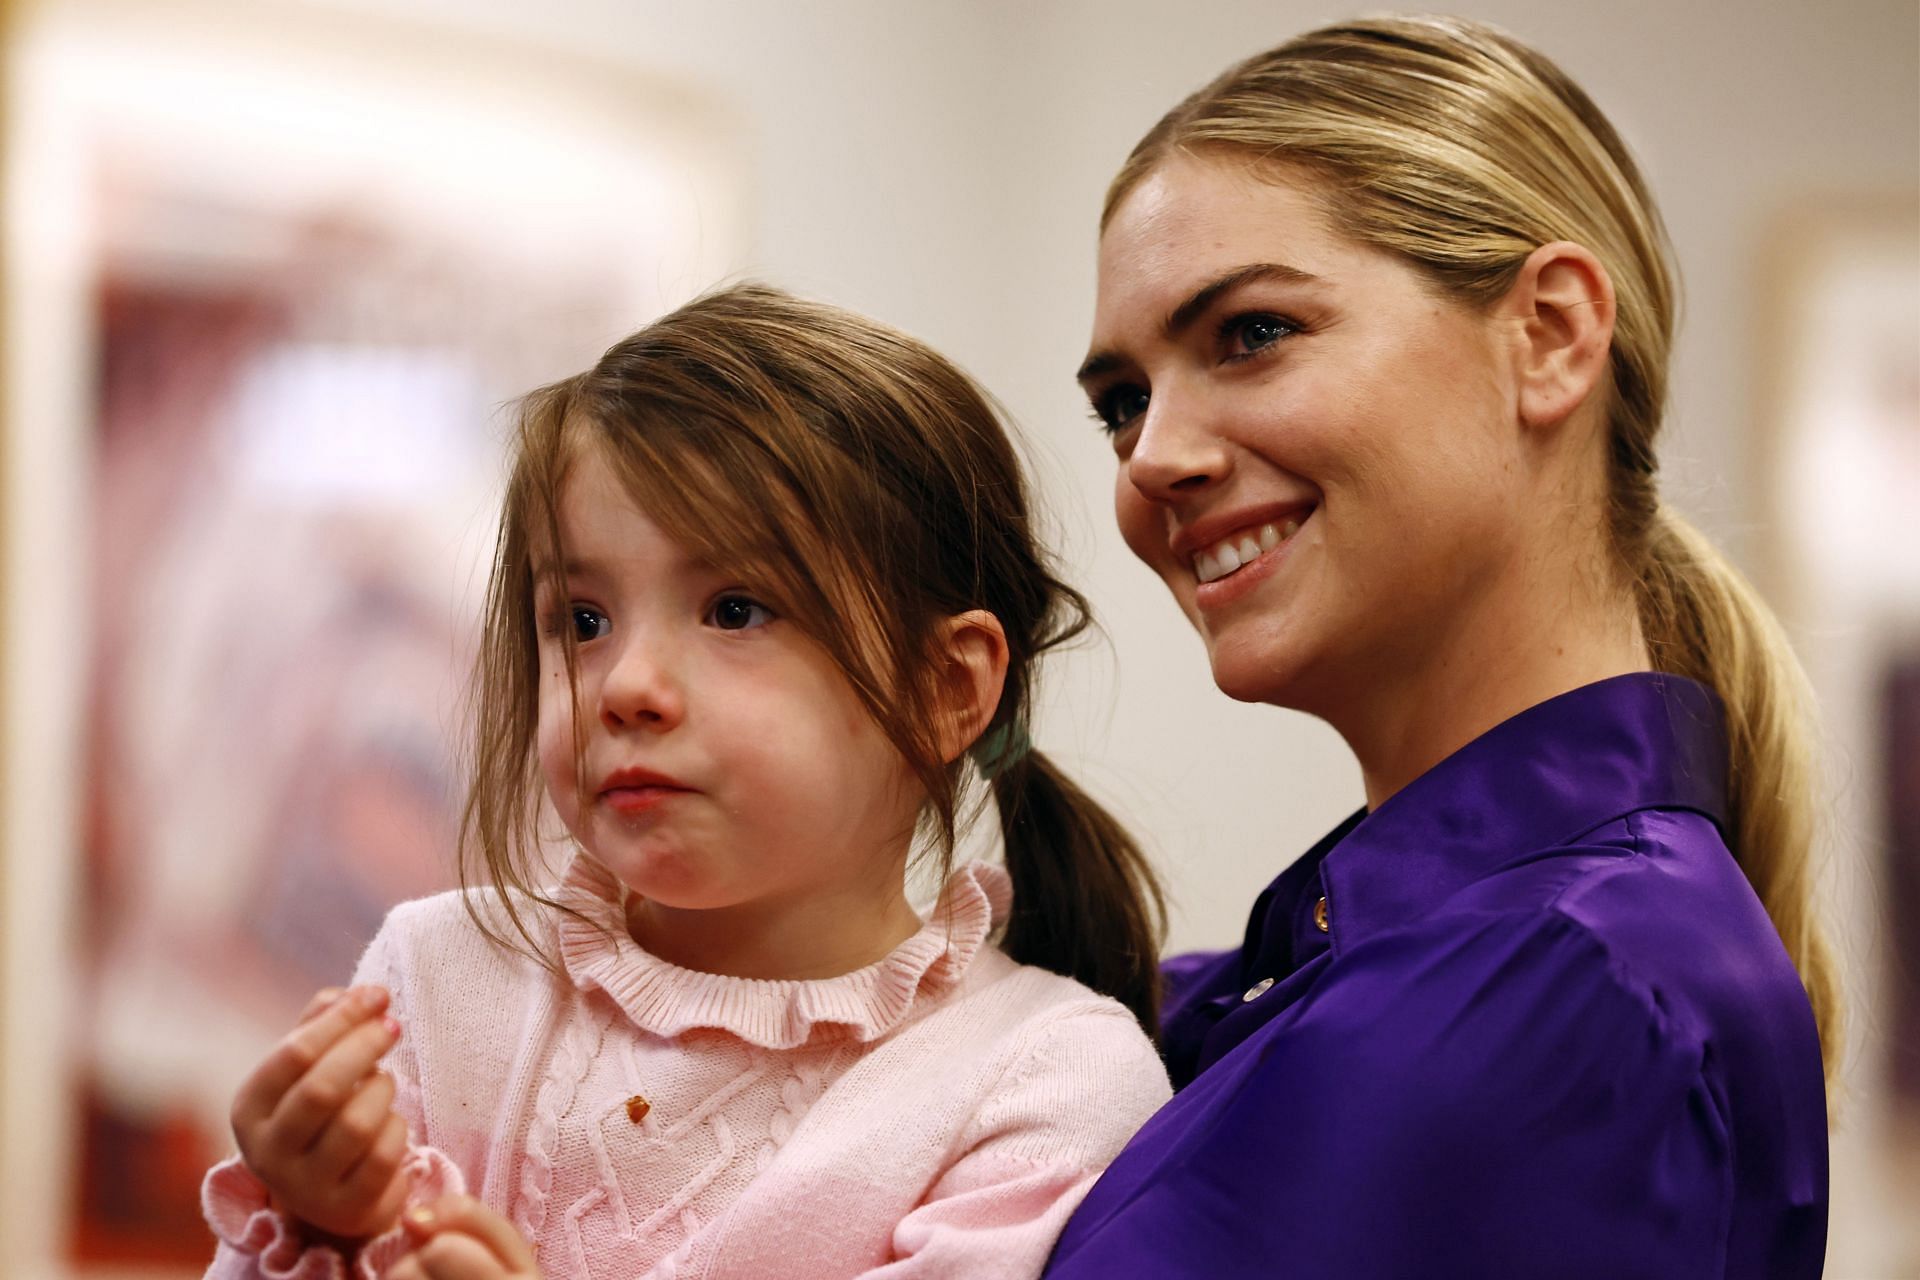 Justin Verlander's Sweet Tribute to Kate Upton, Daughter Shows the